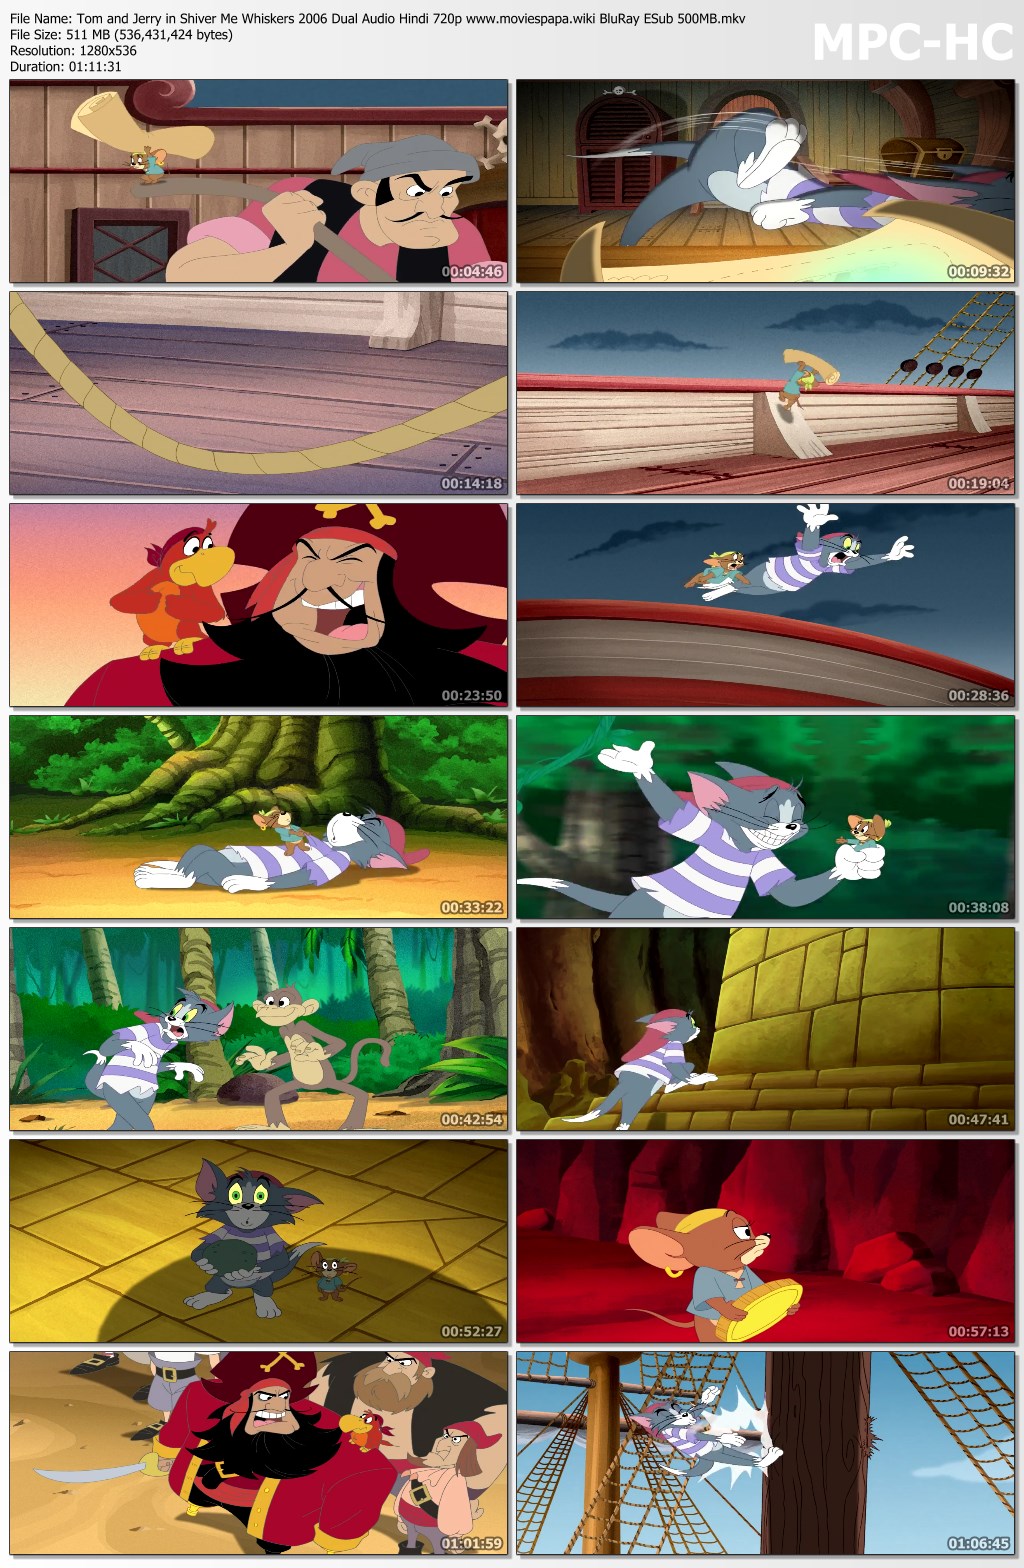 Tom and Jerry in Shiver Me Whiskers 2006 Dual Audio Hindi 720p BluRay ESub  500MB Download